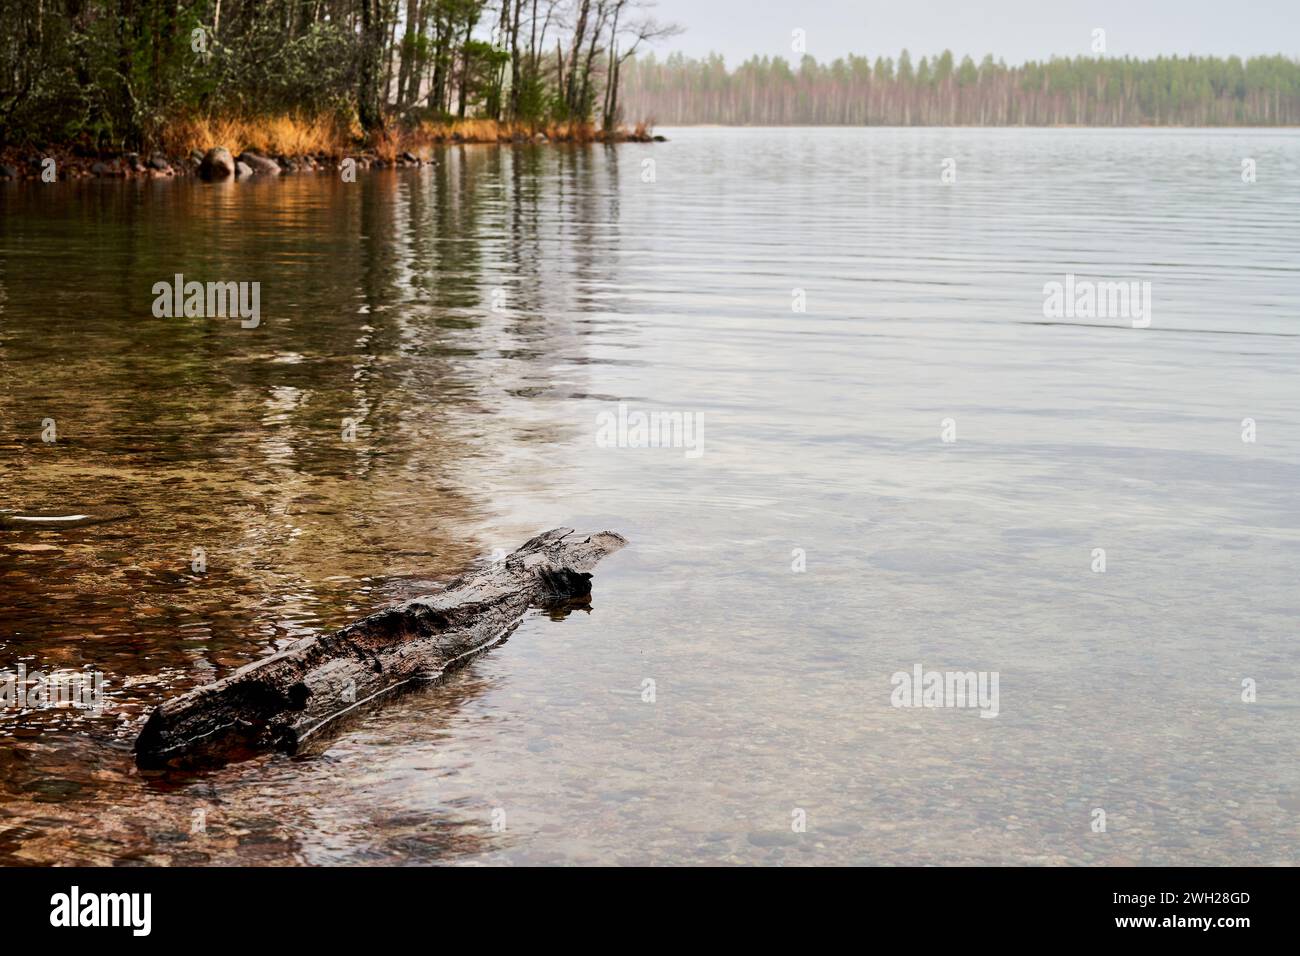 A log floating in the calm waters of the lake with dense trees in the background Stock Photo